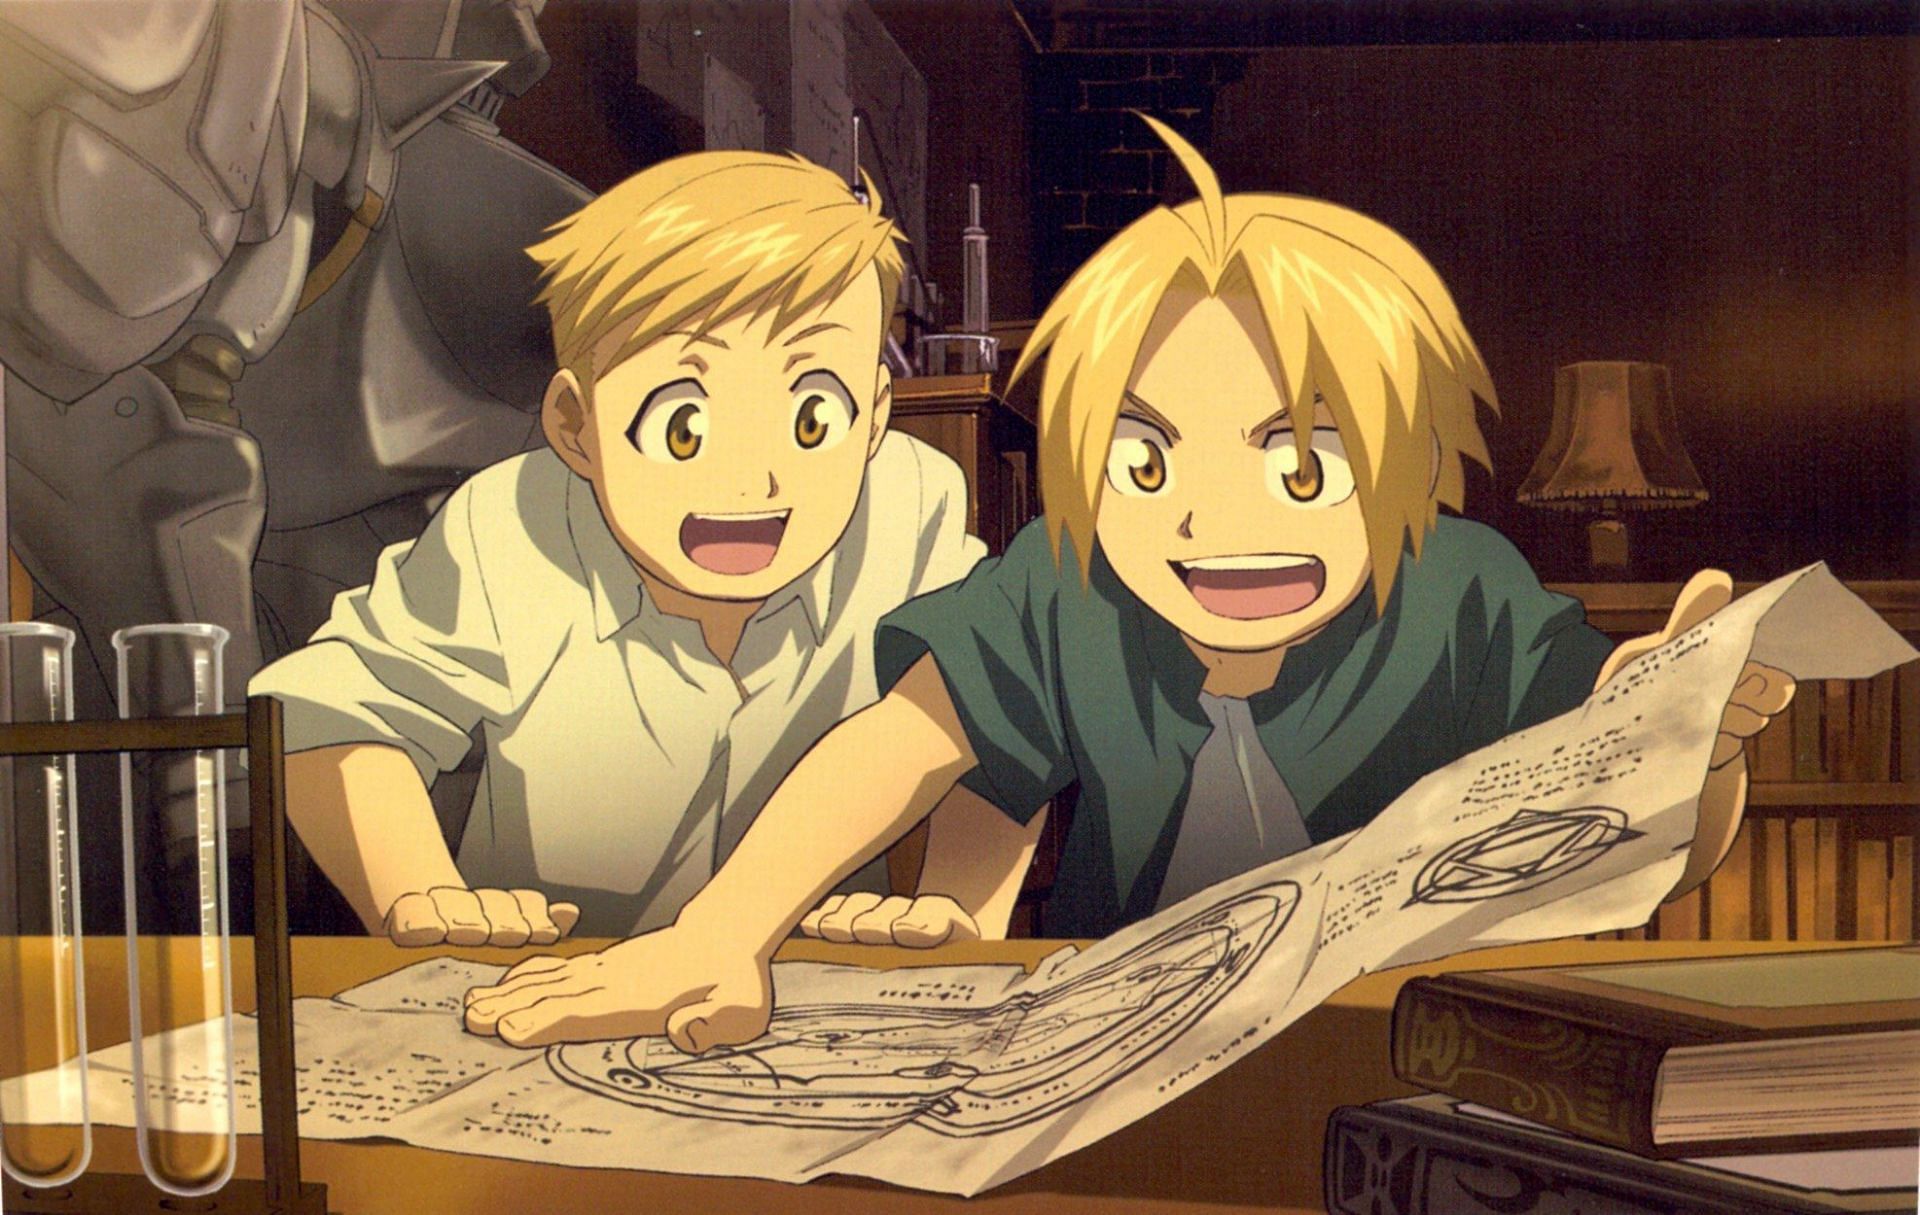 The Elric brothers when they were young (Image via Studio Bones)